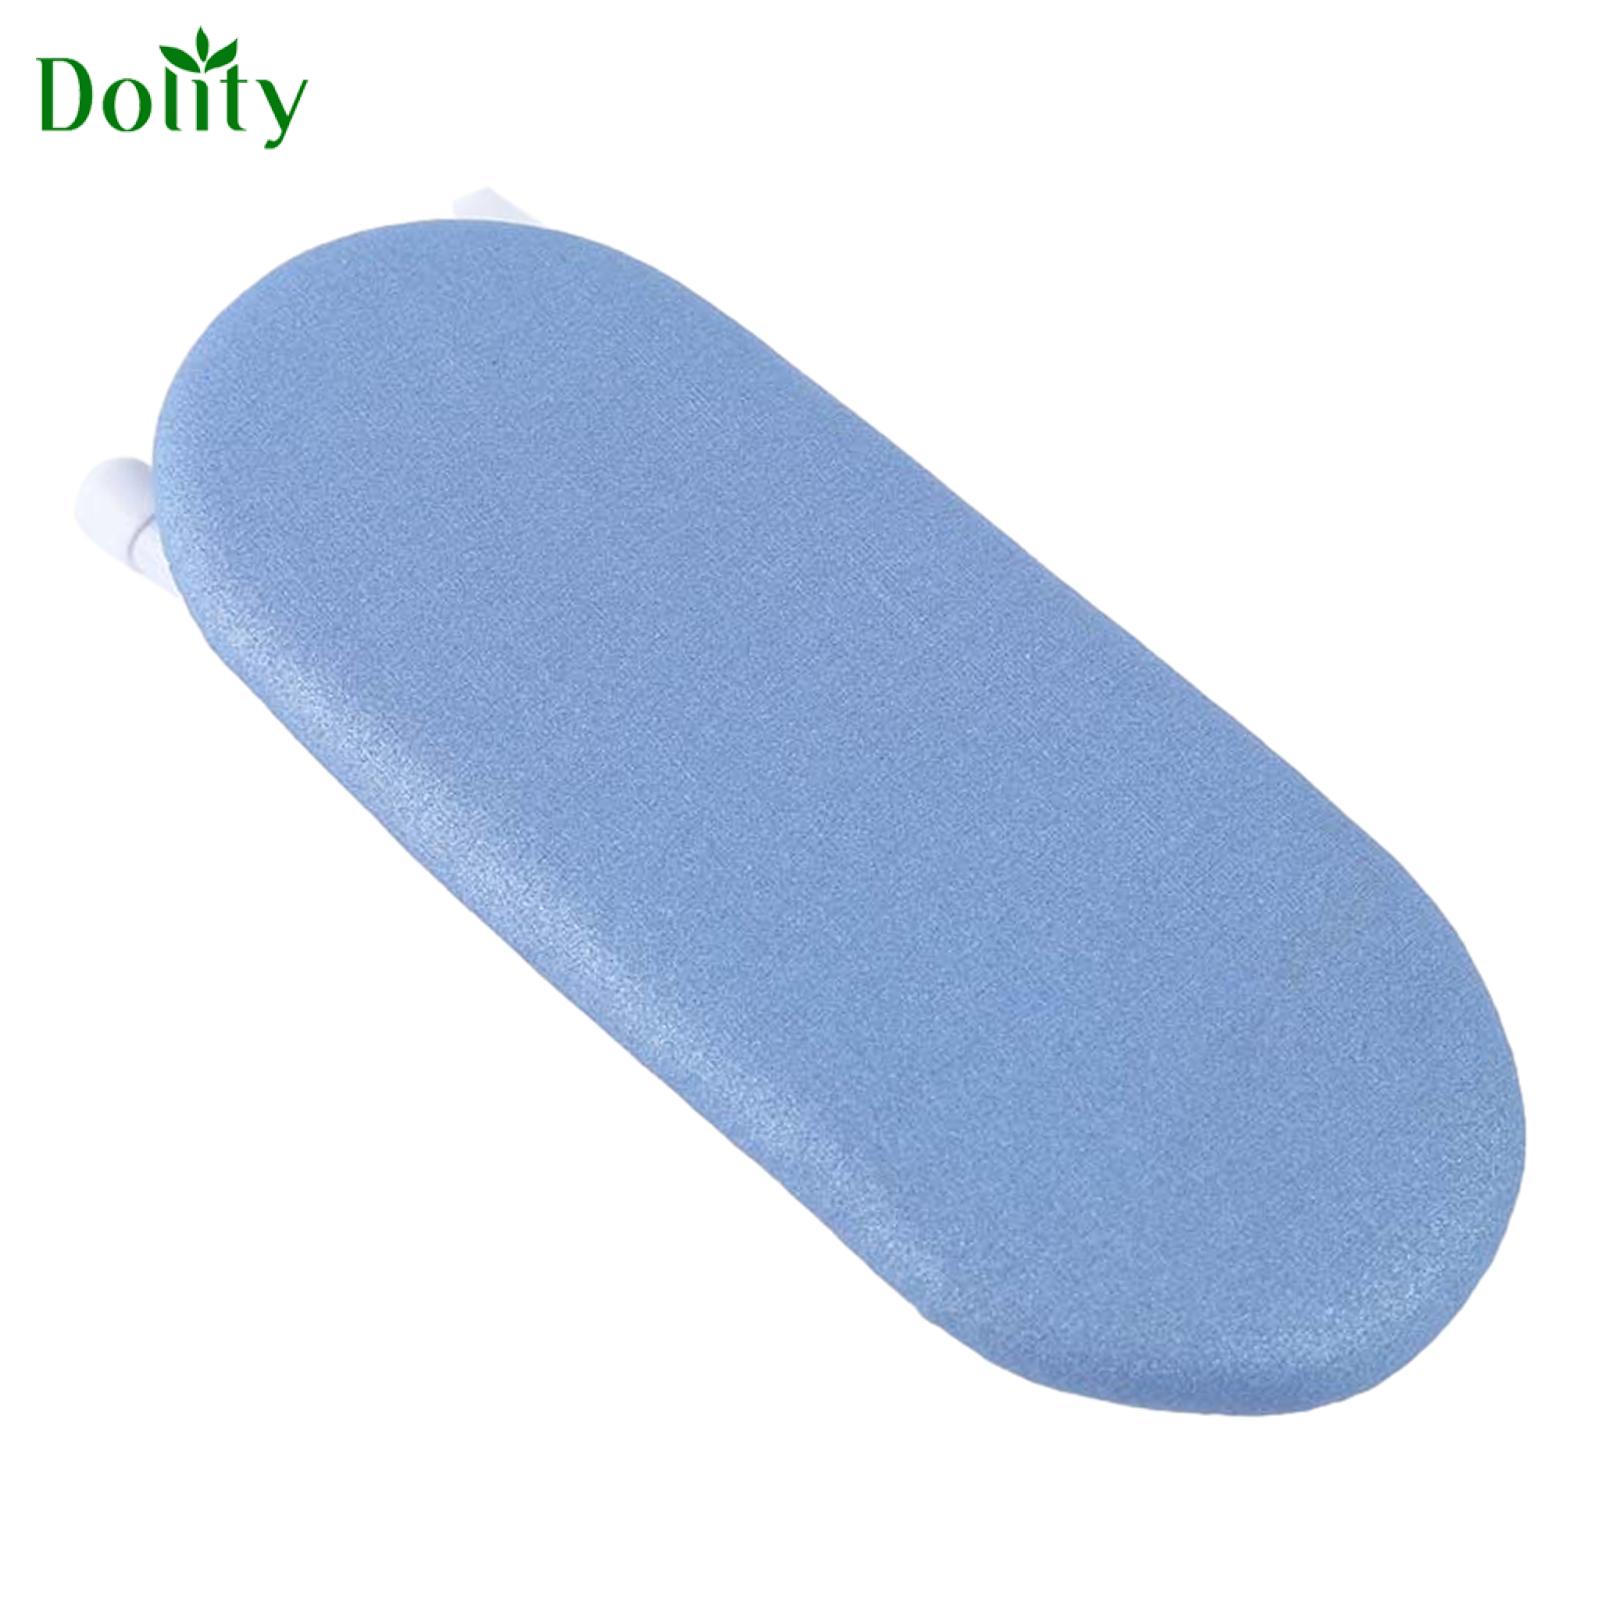 Dolity Tabletop Foldable Ironing Board Tabletop Small Board for Laundry